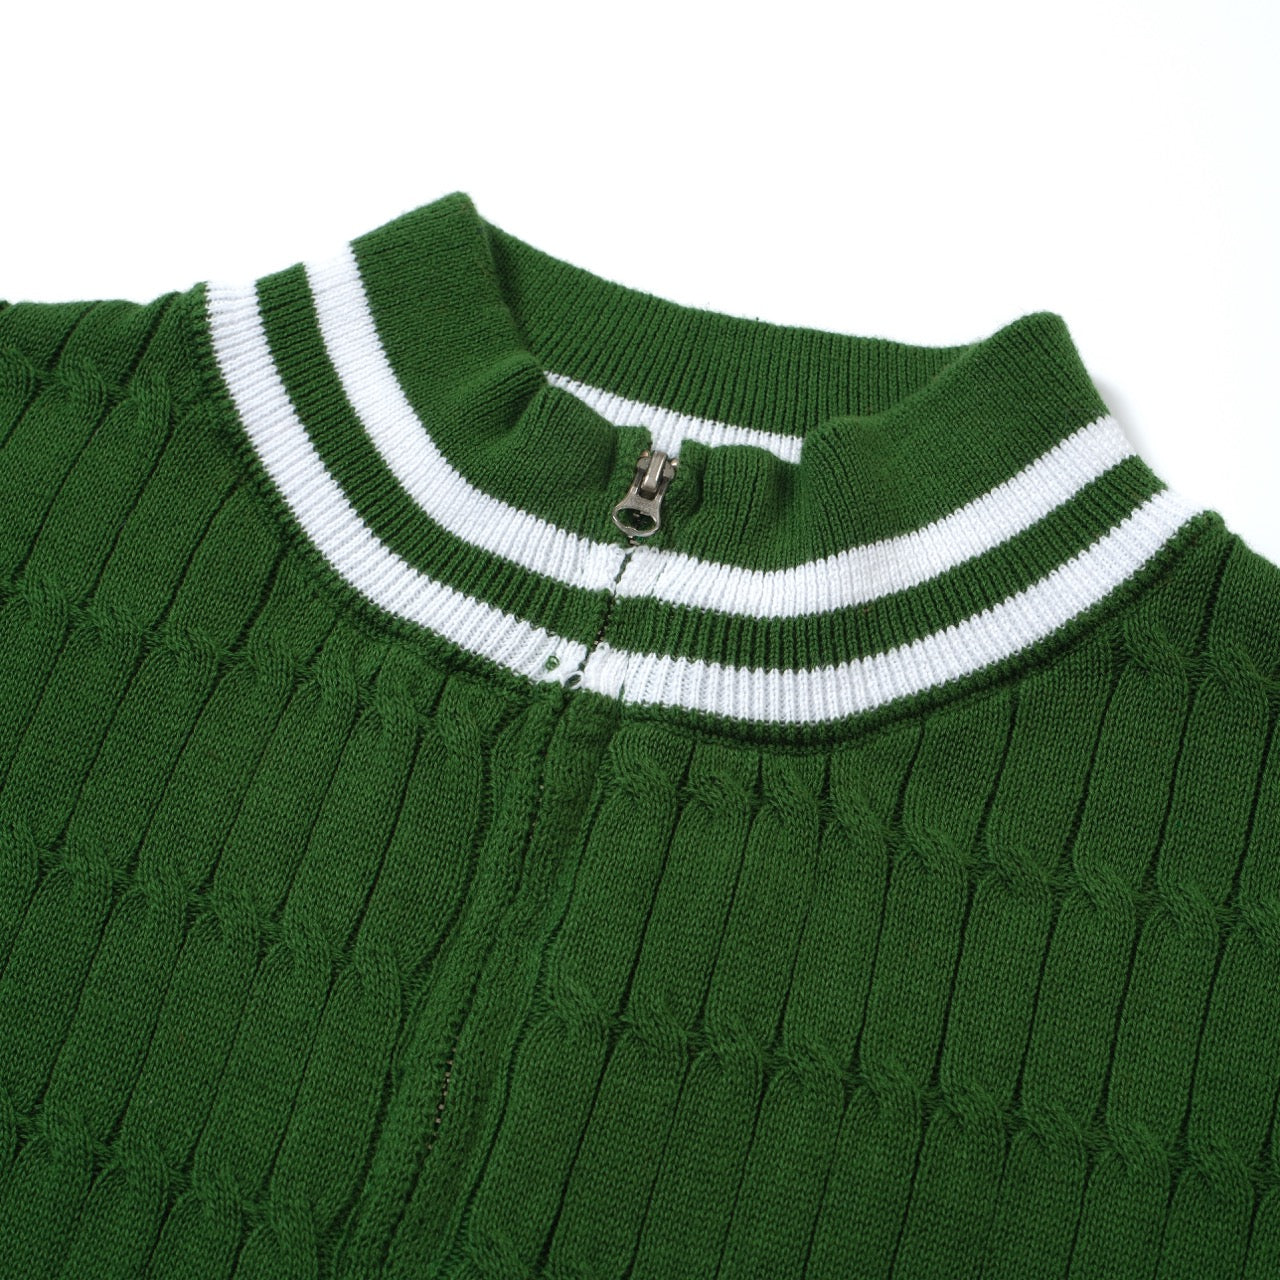 OXKNIT Men Vintage Clothing 1960s Mod Style Casual Dark Green Knitted Wear Retro TShirt